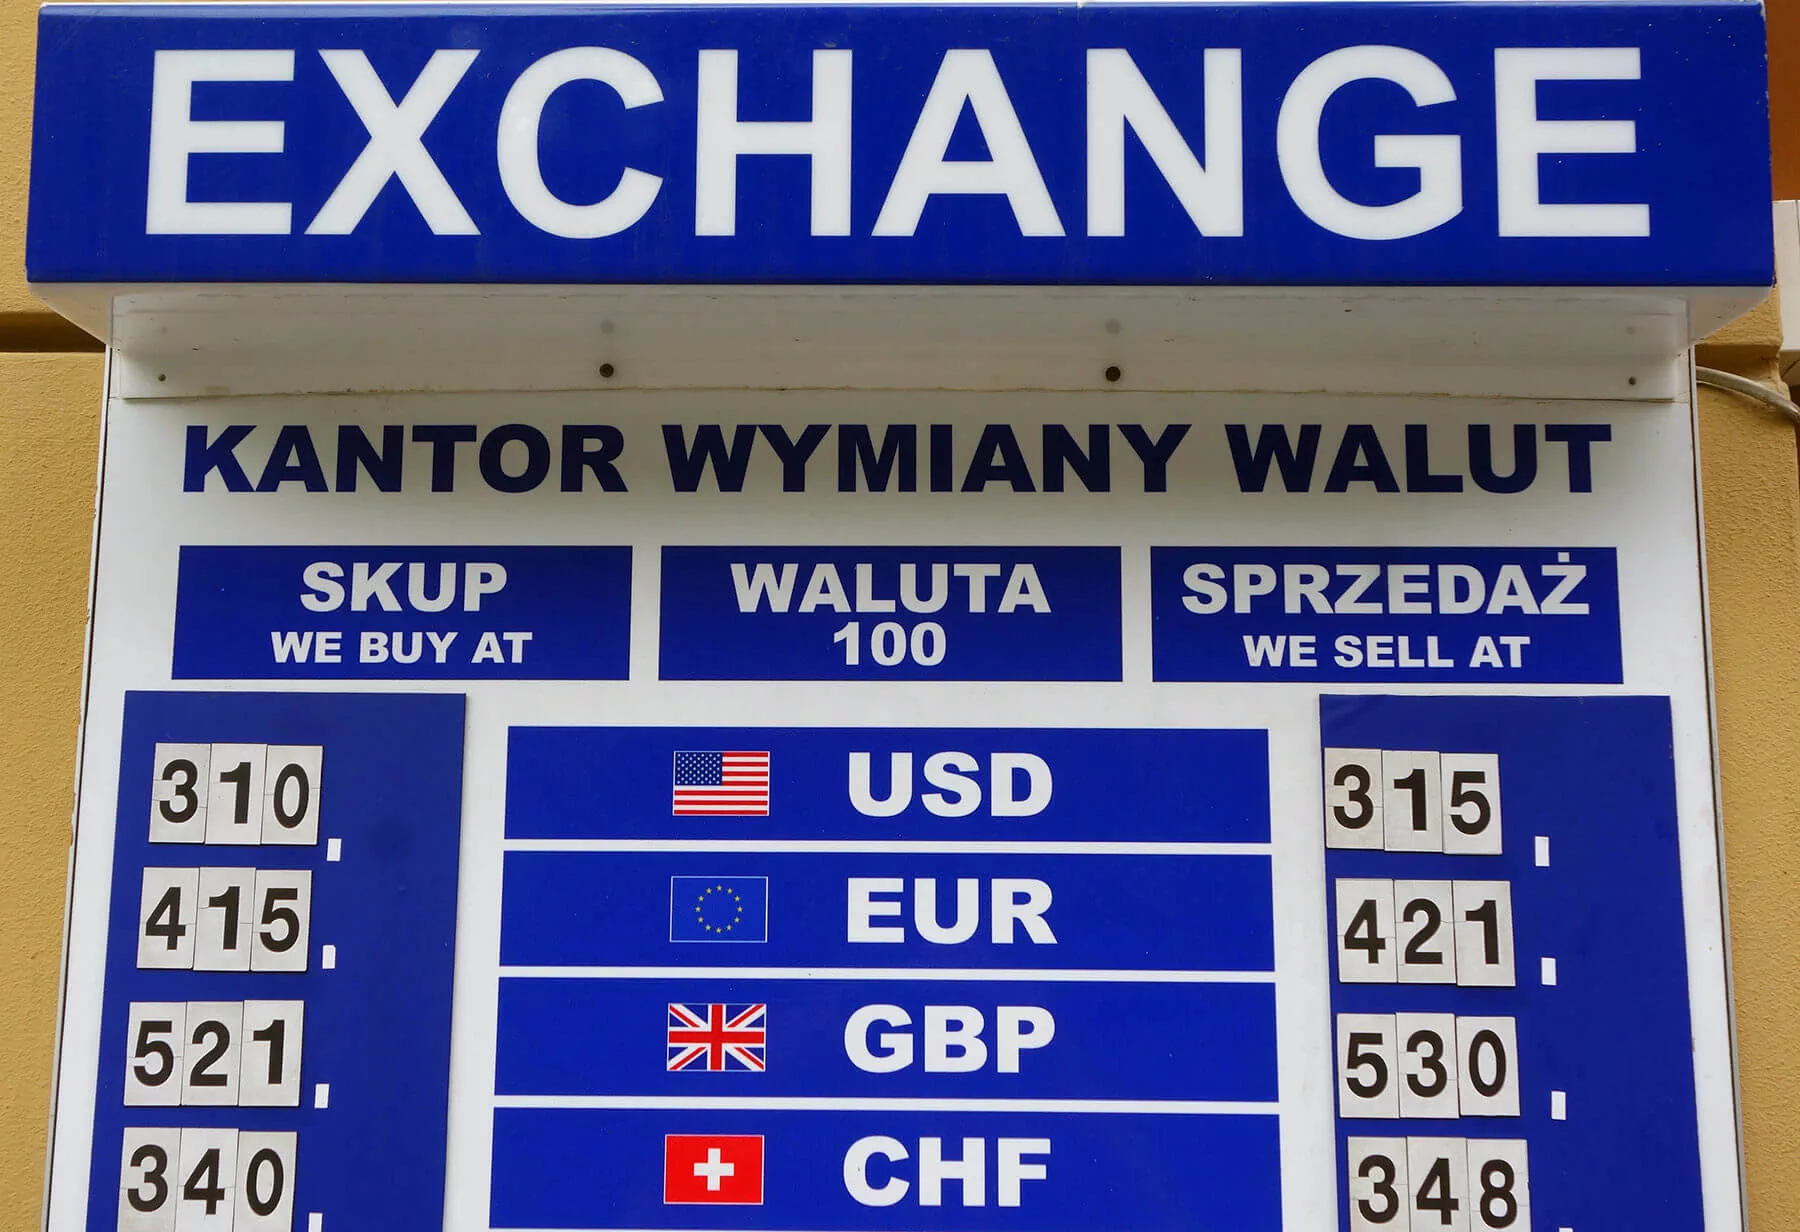 The small gap between the buying and selling rates suggests this Polish exchange bureau is a good deal